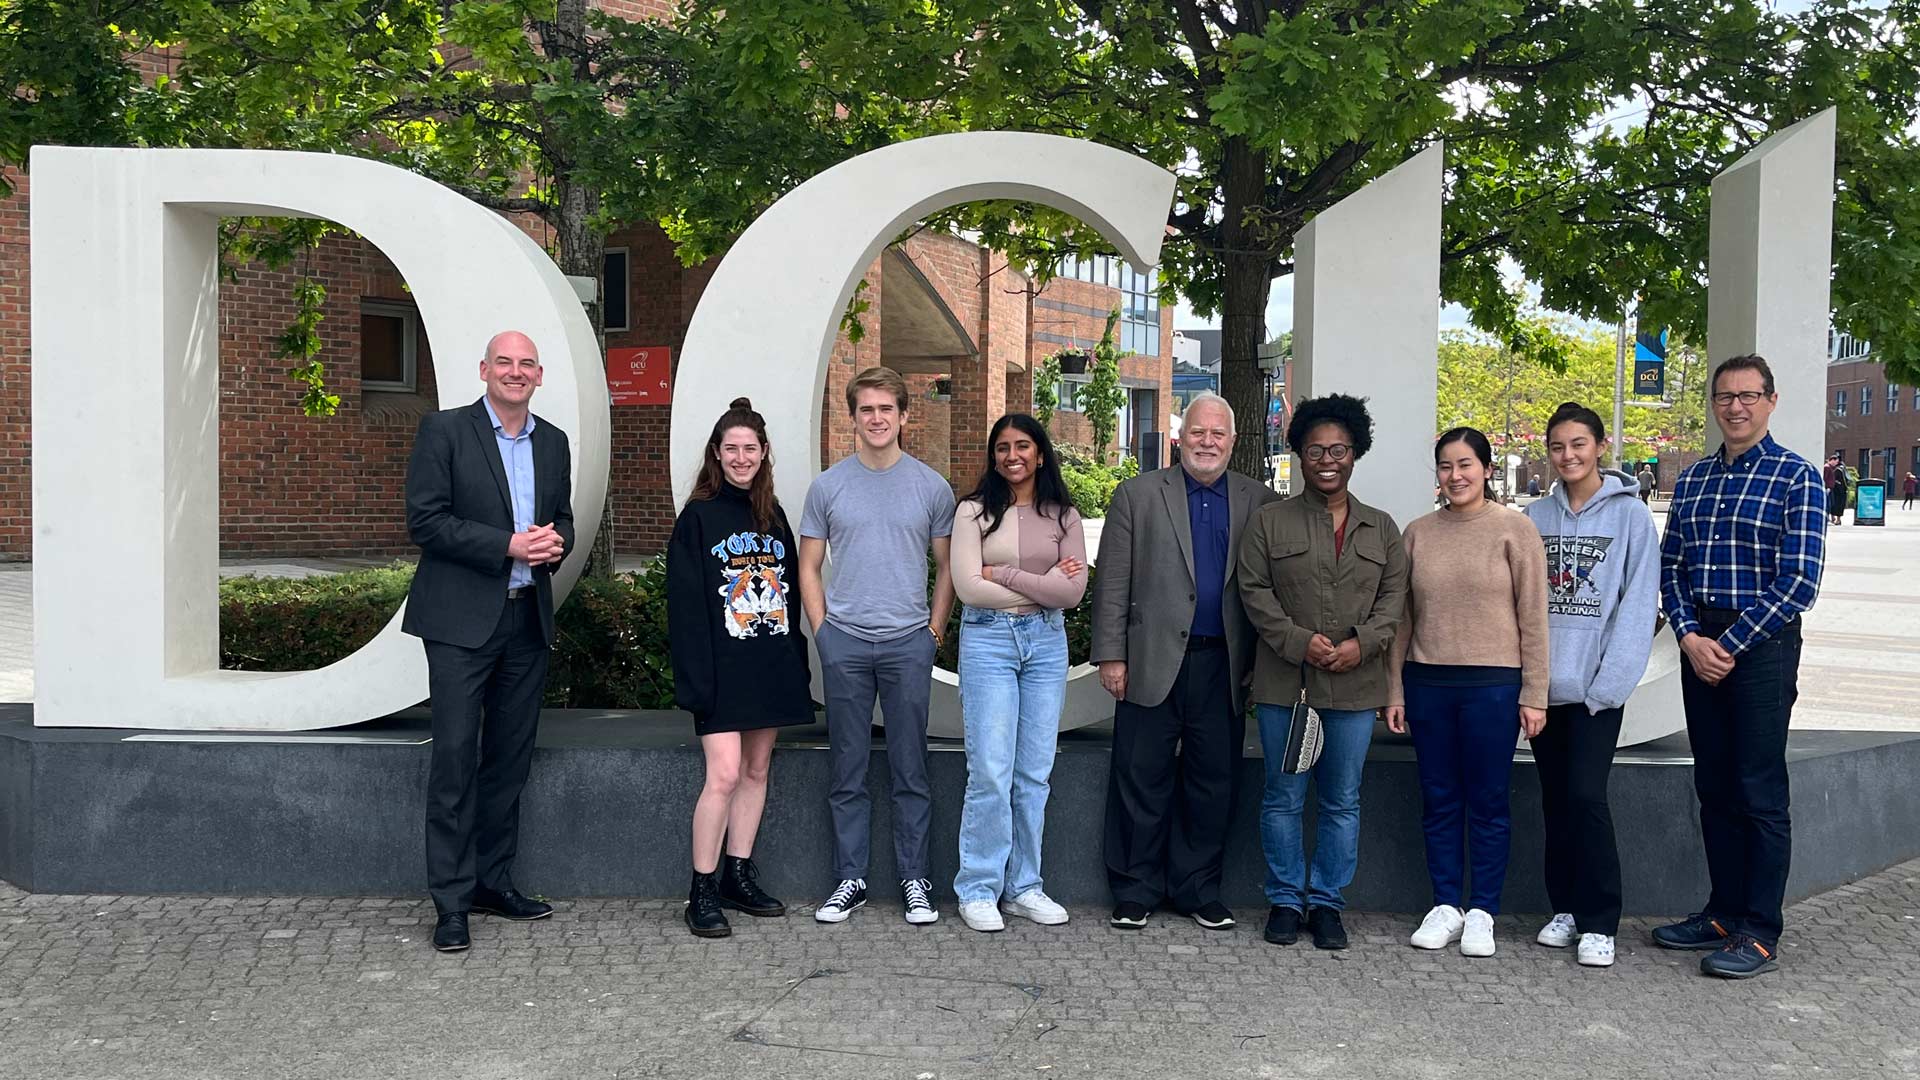 students and faculty standing in front of DCU sculpture on Ireland's Dublin City University campus